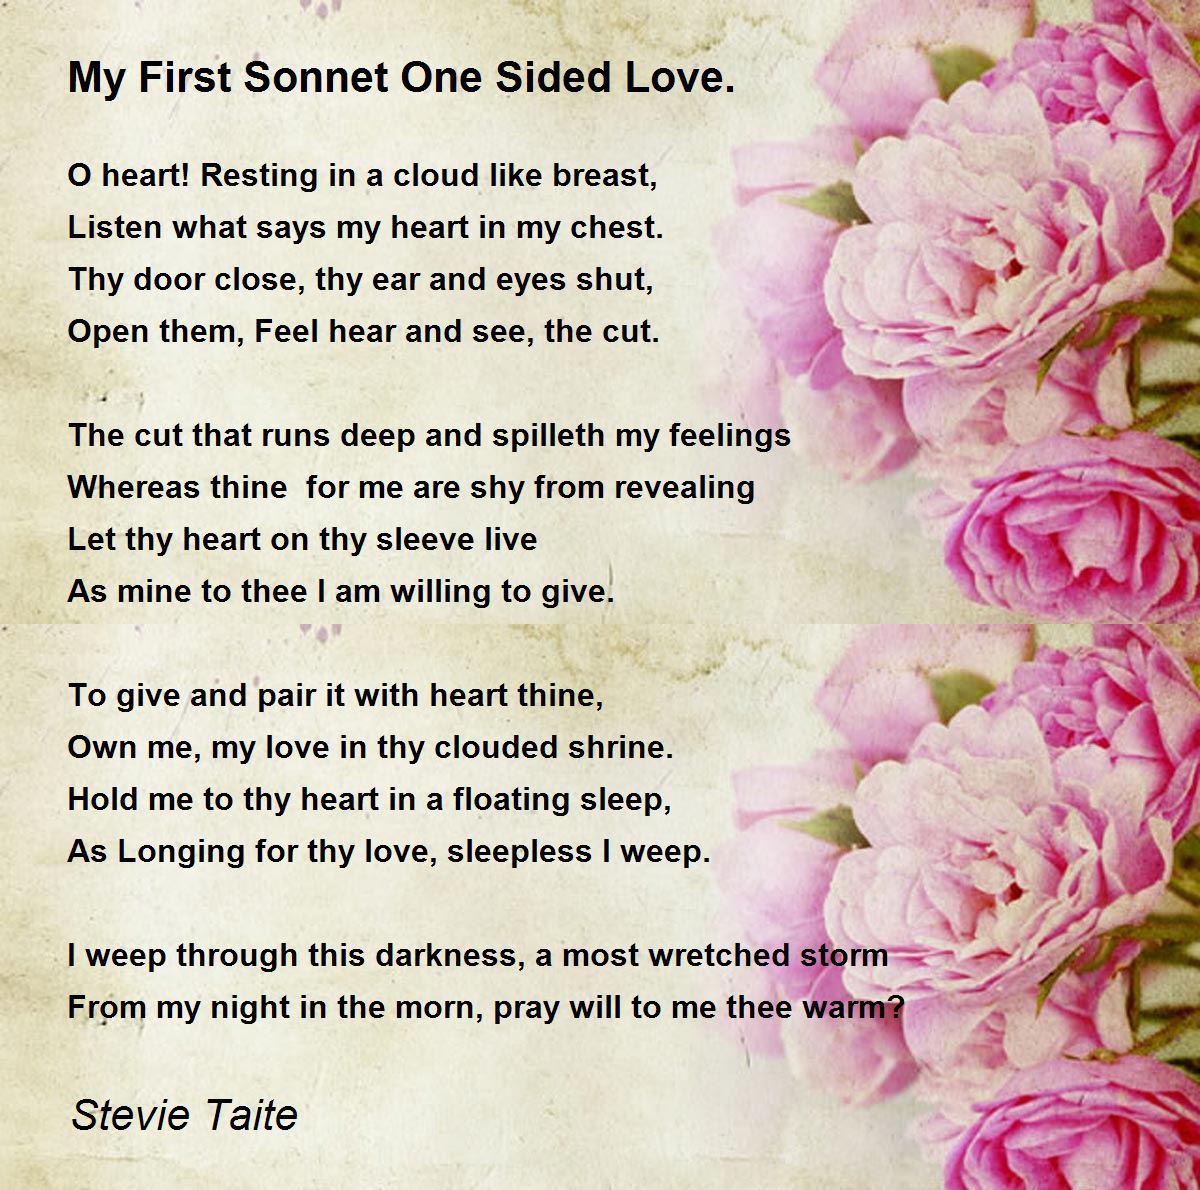 Read My First Sonnet One Sided Love. poem by Stevie Taite written. 